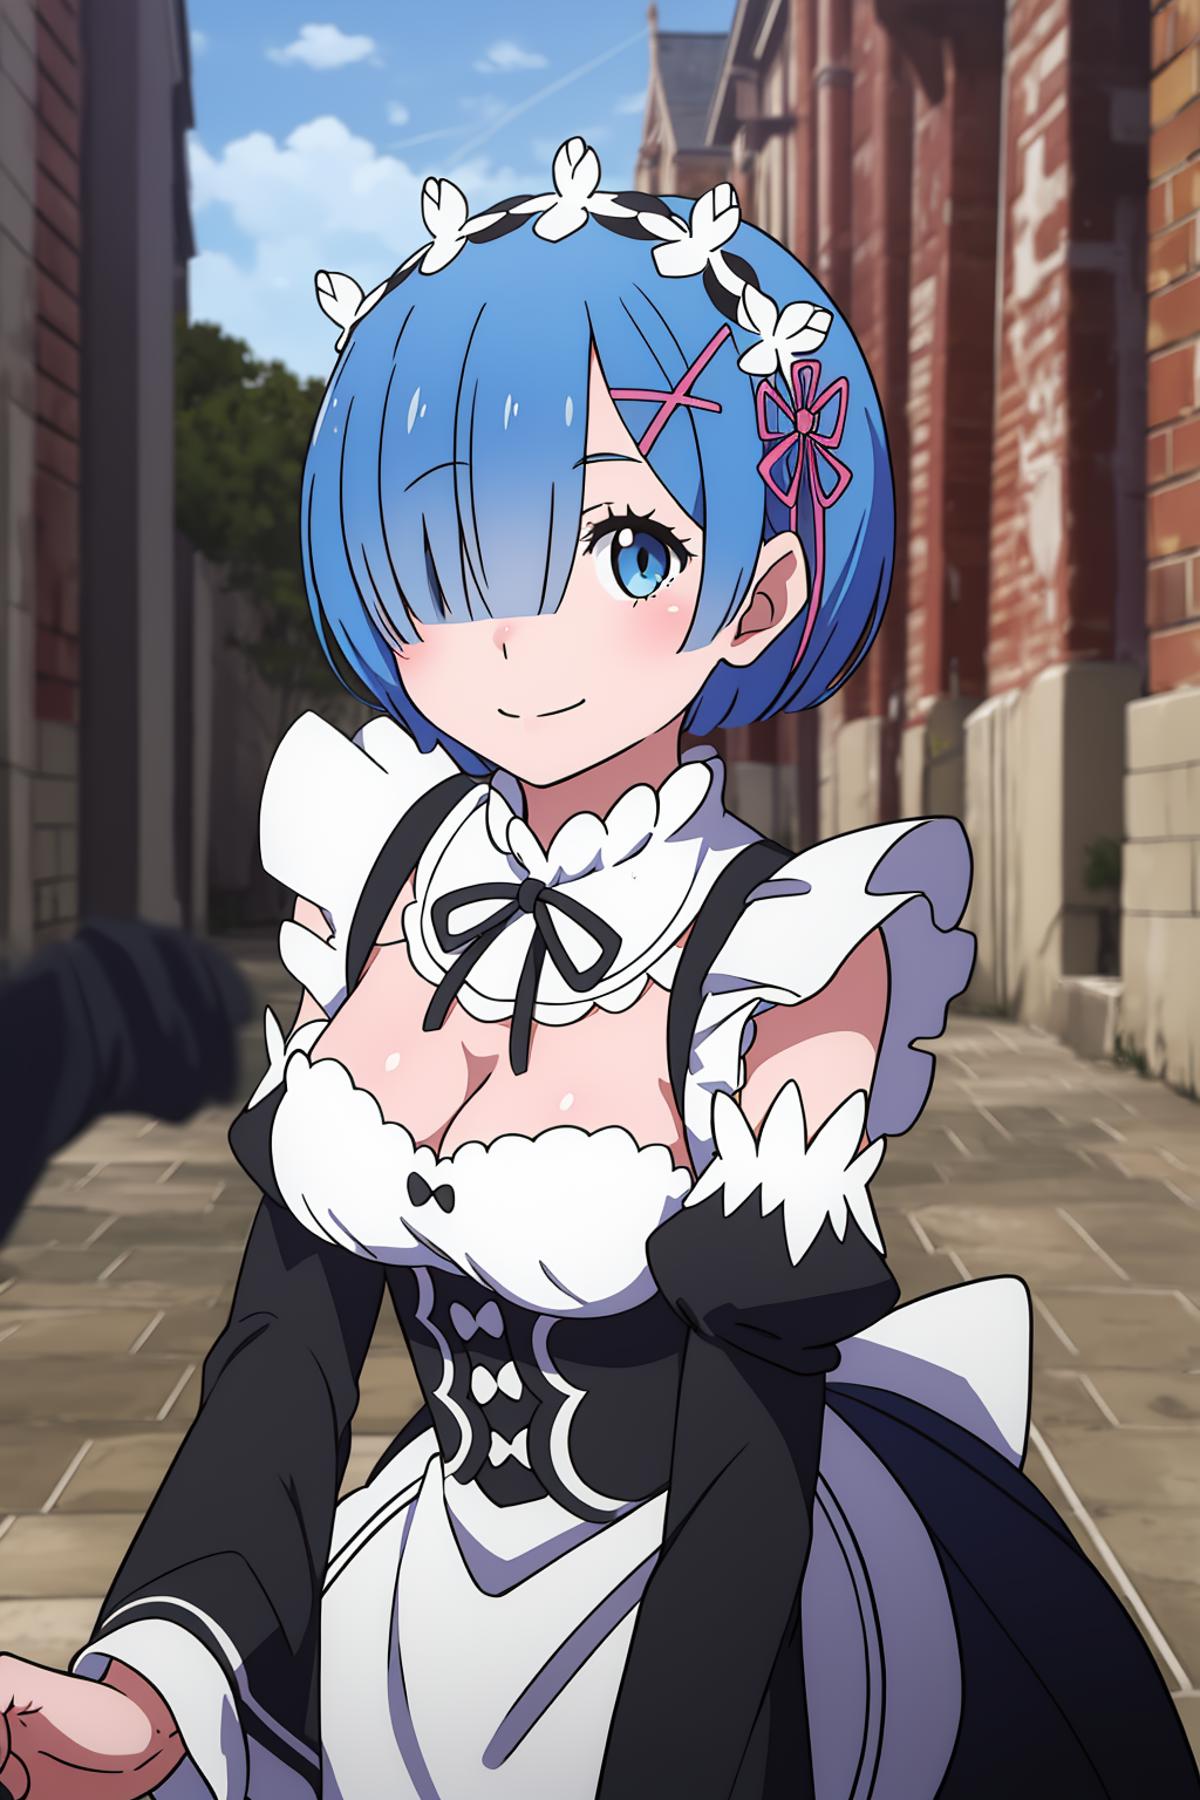 Rem - Re:Zero image by AIAIAnime